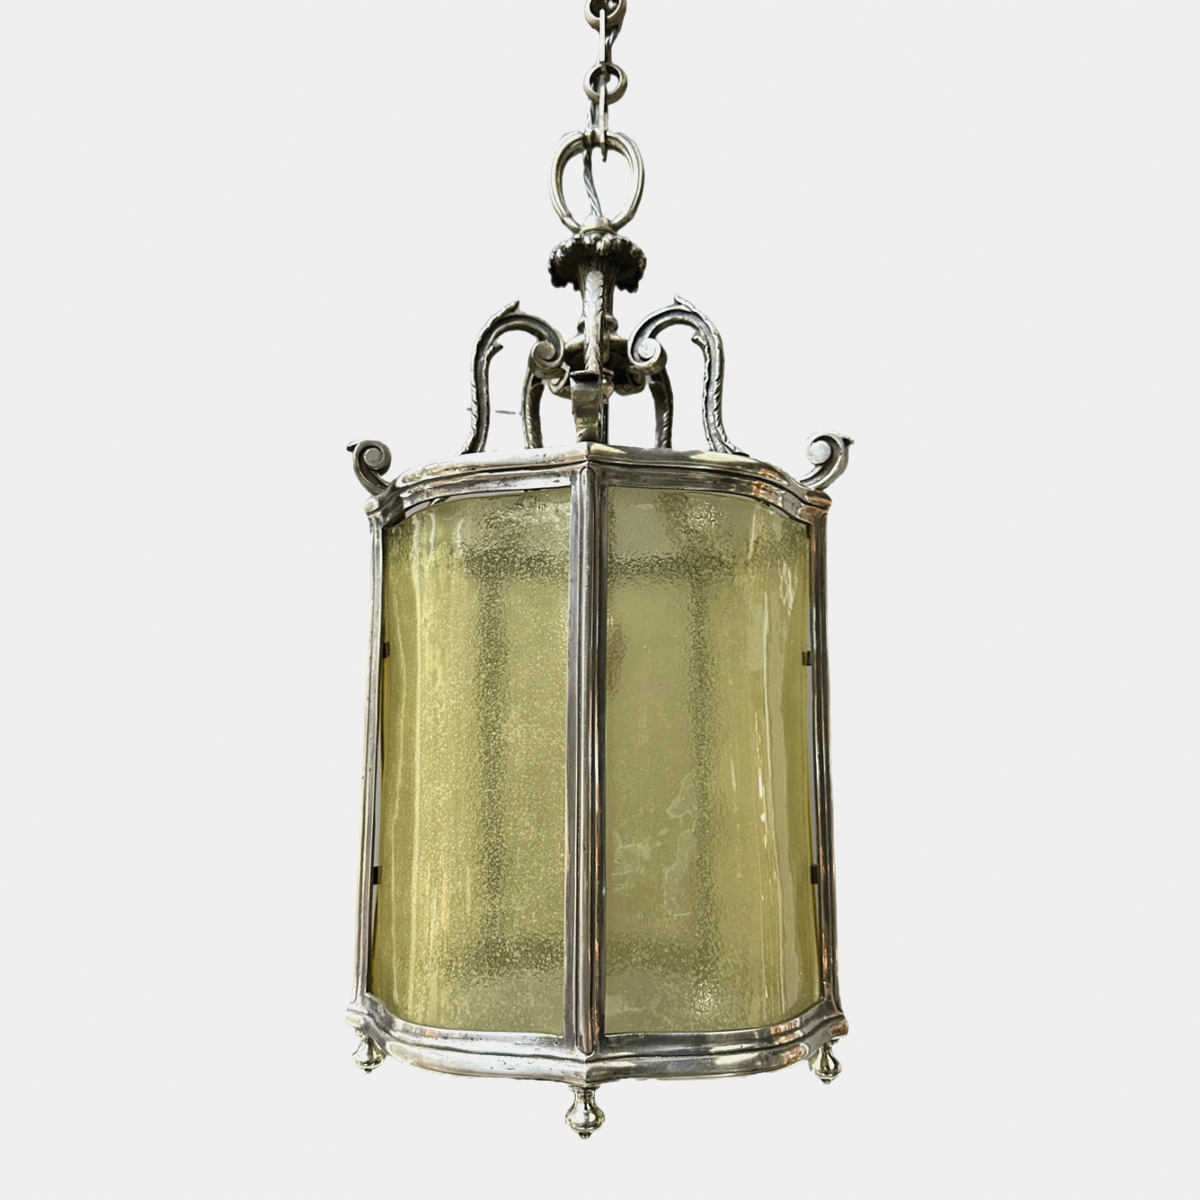 A Classical Nickel And Curved Murano Glass Italian Lantern